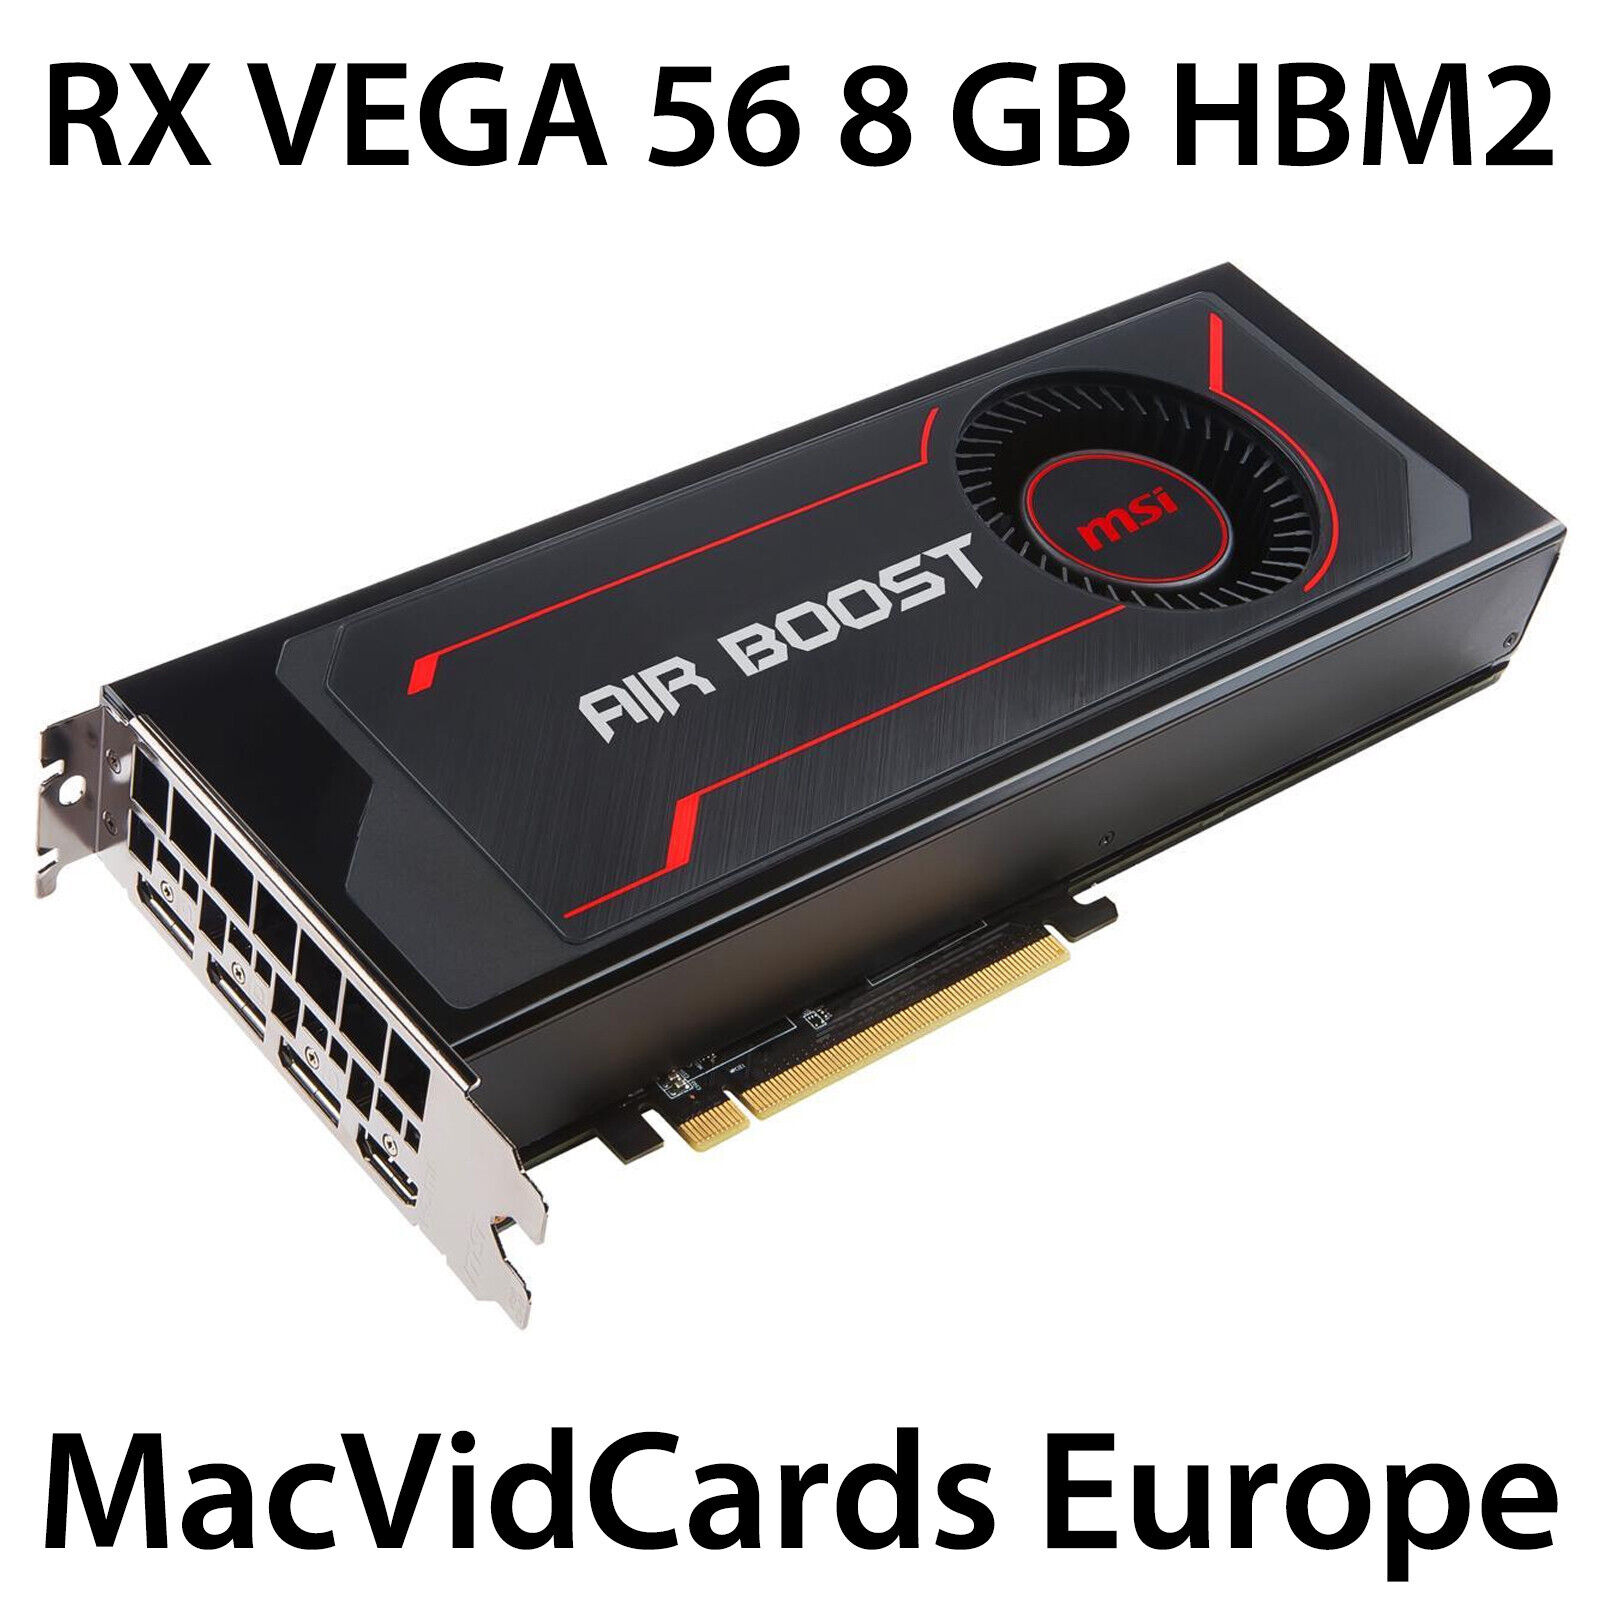 MacVidCards AMD Radeon RX Vega 56 8 GB HBM2 for Apple Mac Pro with BOOT SCREEN